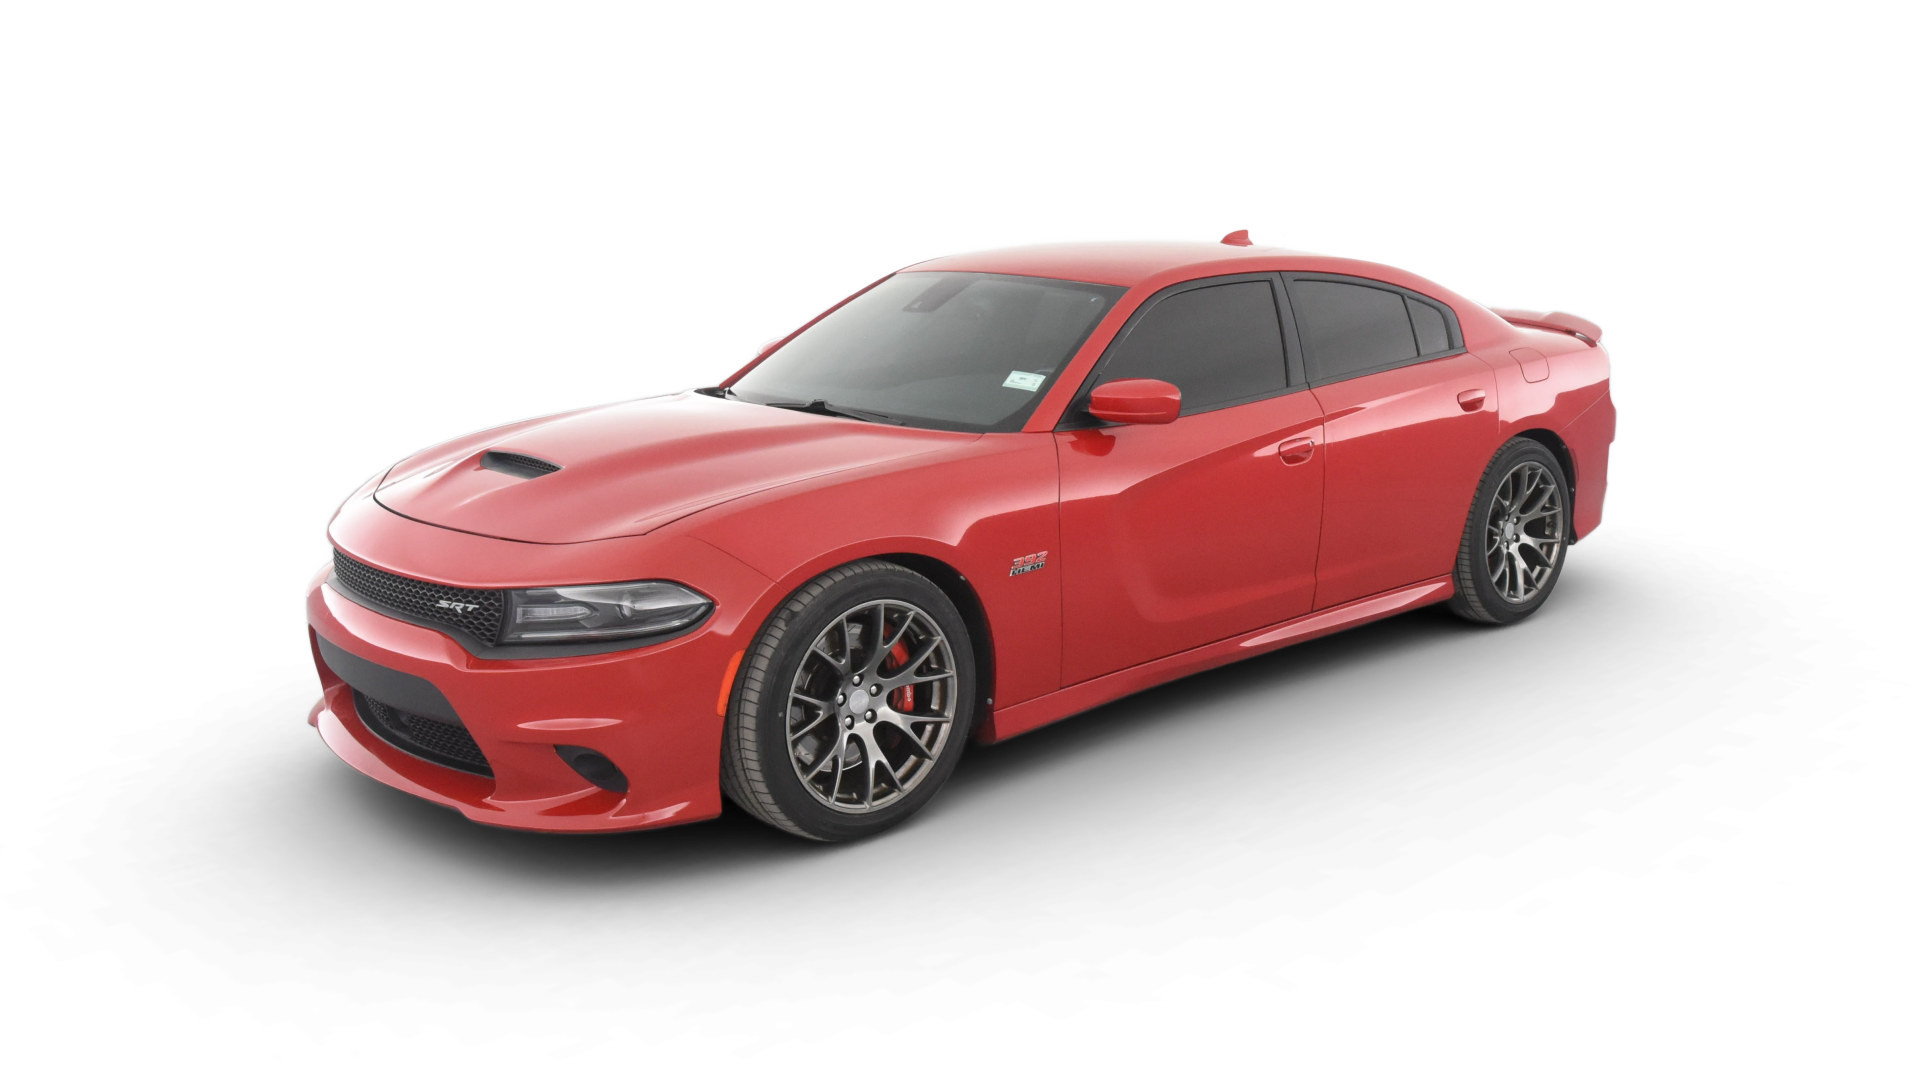 Dodge Charger SRT 392 for Sale near Me